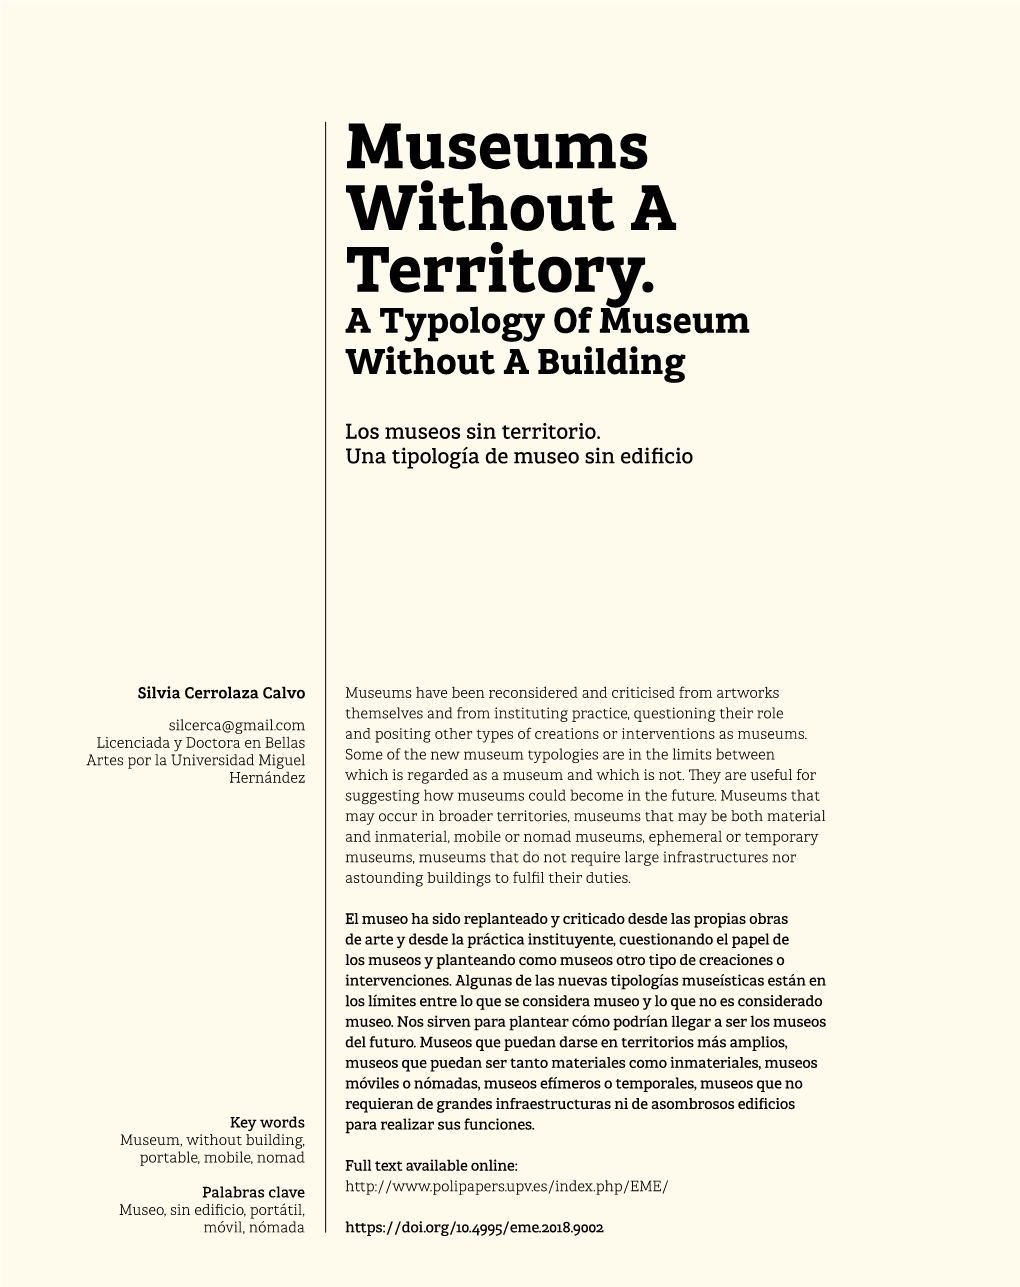 Museums Without a Territory. a Typology of Museum Without a Building